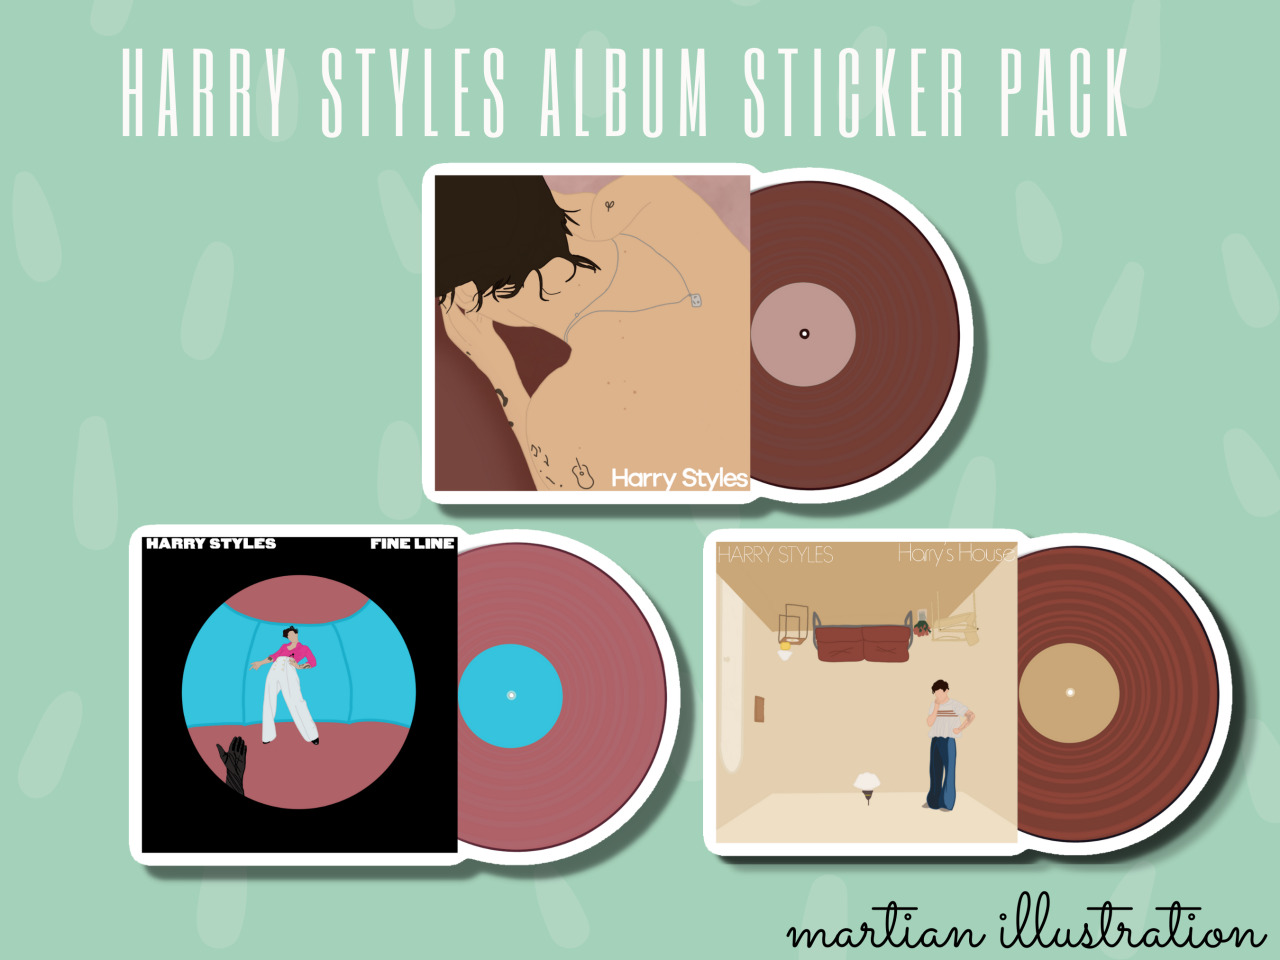 HARRY STYLES ALBUM STICKERS by MARTIAN ILLUSTRATION !!hey cuties! i just made these bc i’m so hyped for harry’s house!! this is a little sticker pack but i have other options in storethis pack of 3 is $8 cad ! individual options start at $3can be found on my etsy shop !! likes and reblogs are really appreciated!!LINK HERE #she#cherry#hs #treat people with kindness #Harry Styles #taylor swift merch  #one direction merch #harrys house#1d merch#BEACHWOOD CAFE #harry styles merch  #harry styles sticker  #harry styles stickers  #hs fine line #harry stickers #fine line merch  #harrys house merch  #harrys house stickers